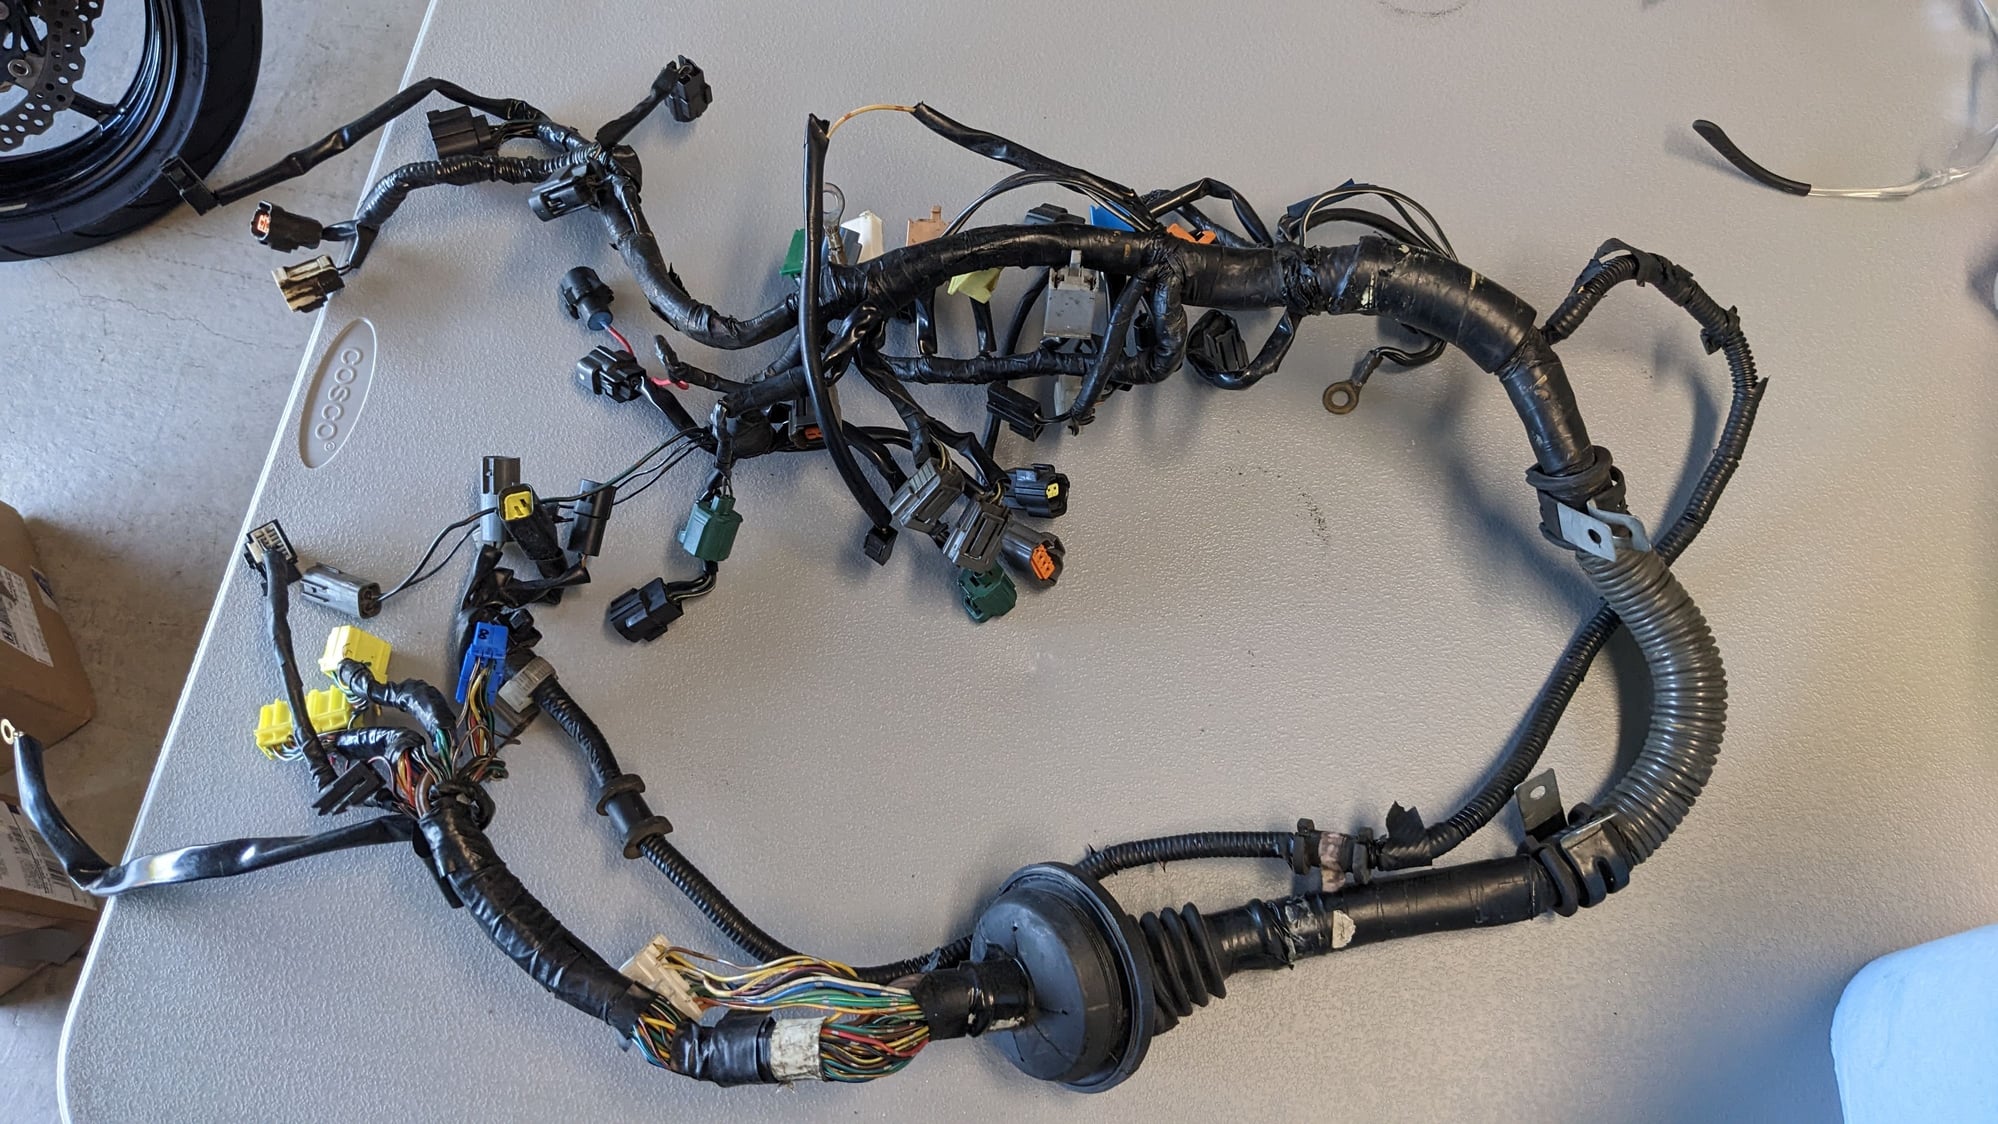 1995 Mazda RX-7 - Wiring Harness LHD - Engine - Electrical - $100 - Oceanside, CA 92057, United States